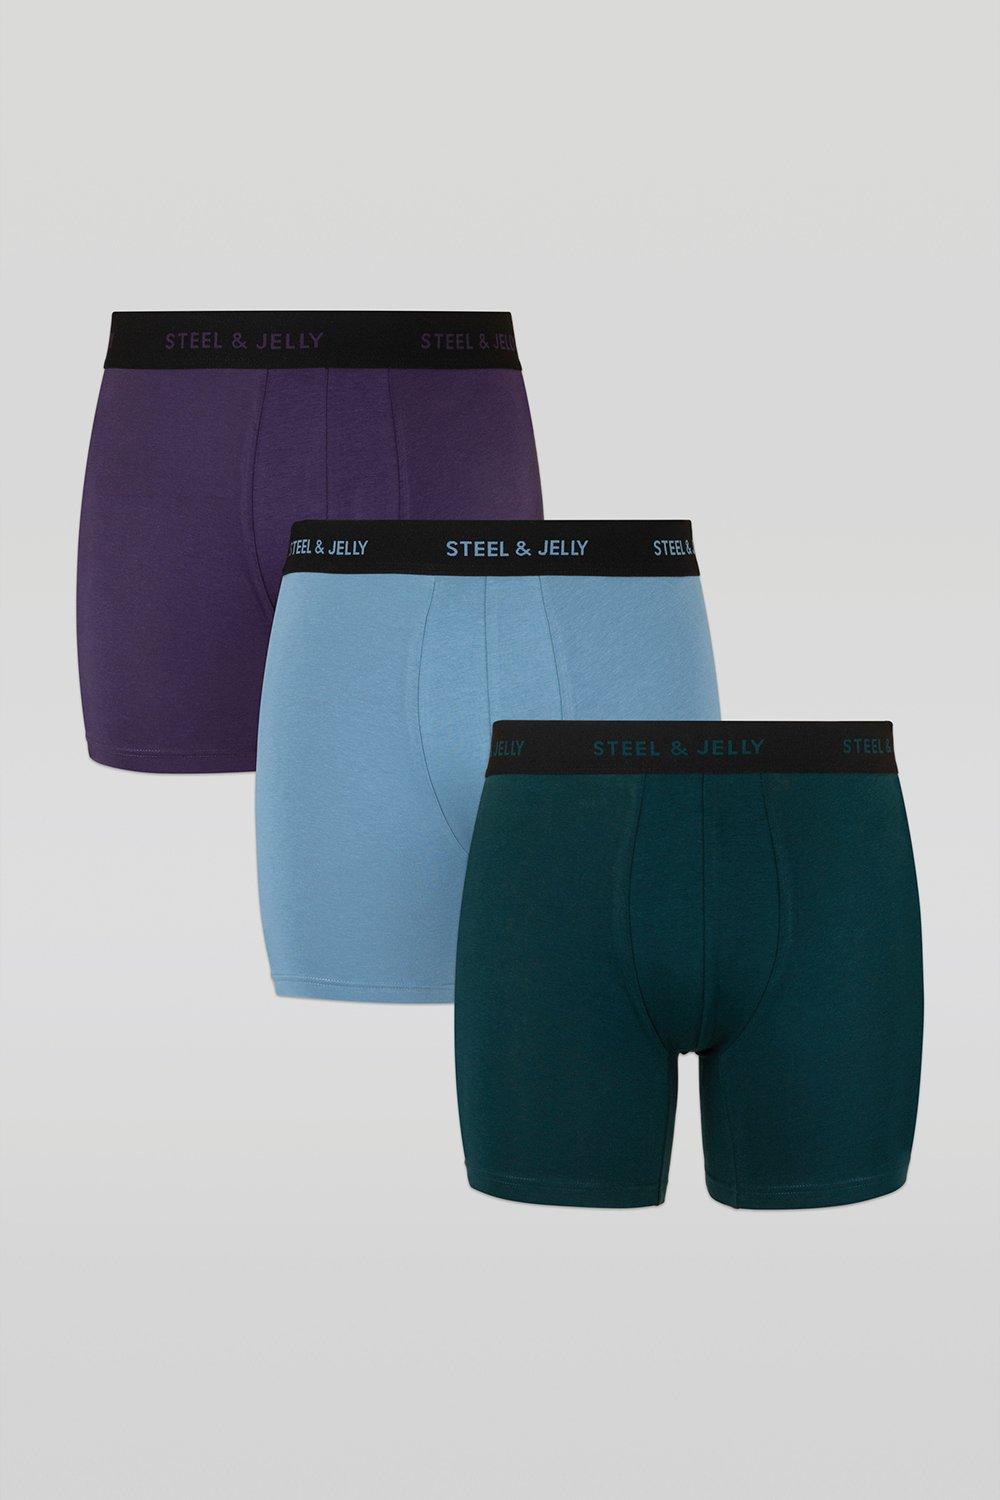 Purple, Blue & Green 3 Pack Boxers